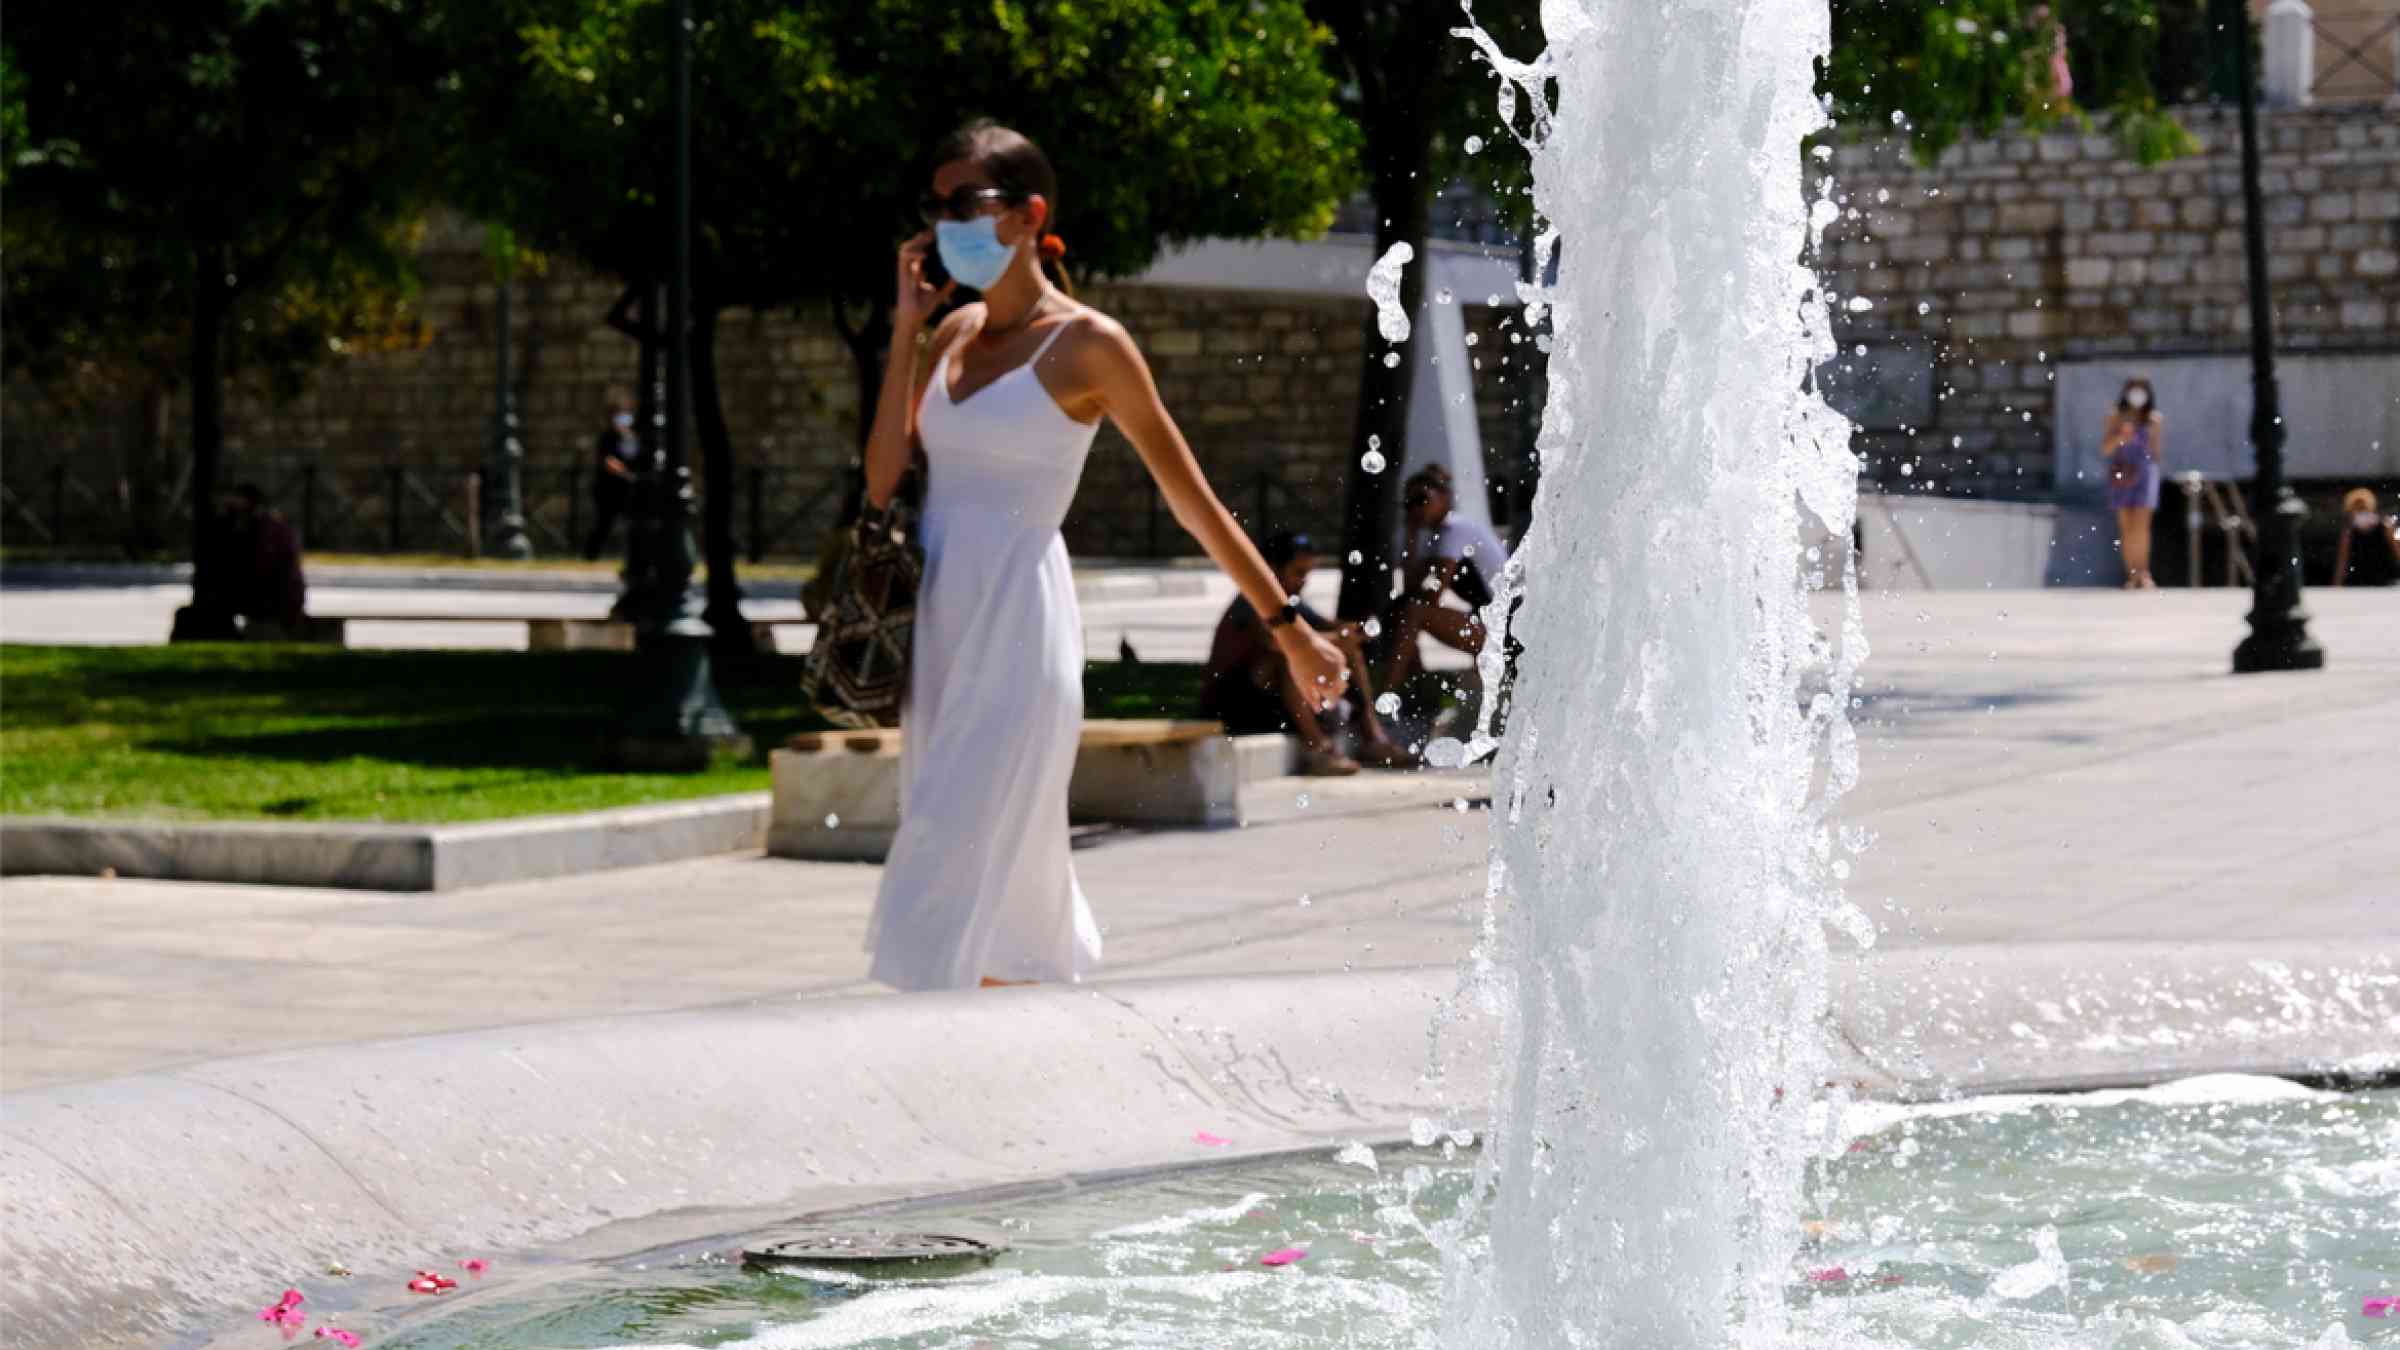 Person walks next to a fountain during a heatwave, in Athens, Greece on July 16, 2021.